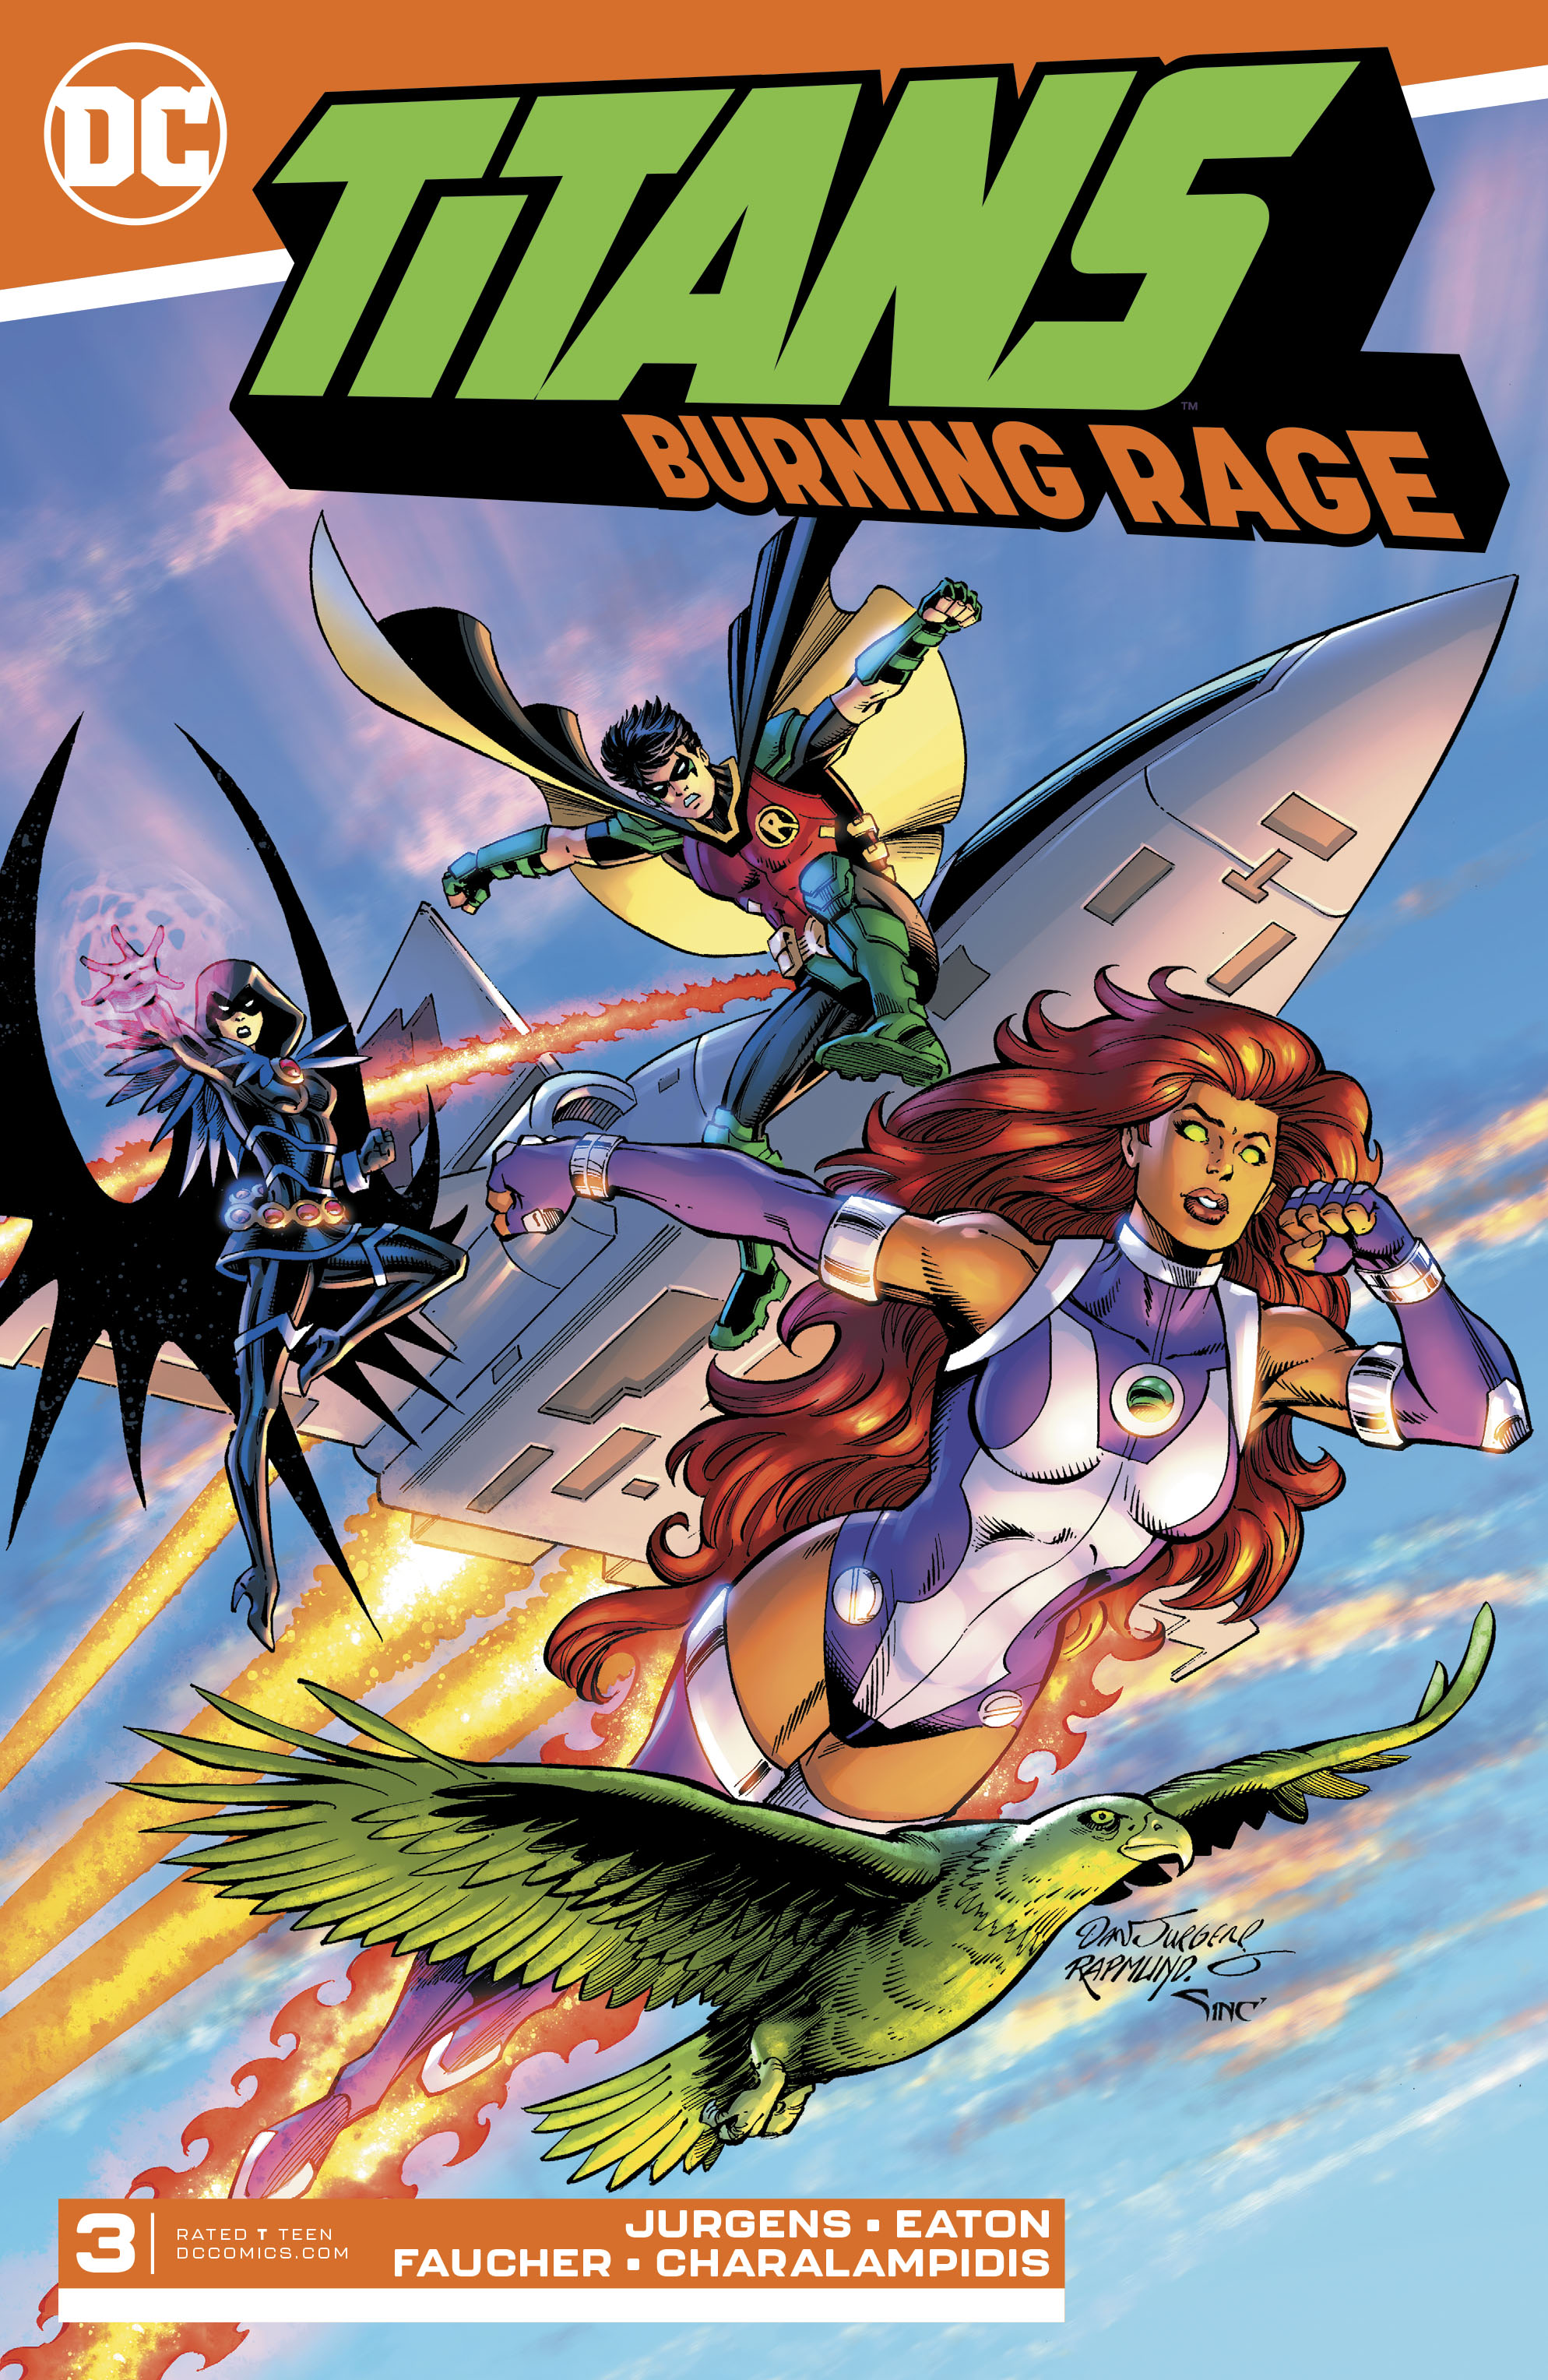 Read online Titans: Burning Rage comic -  Issue #3 - 1